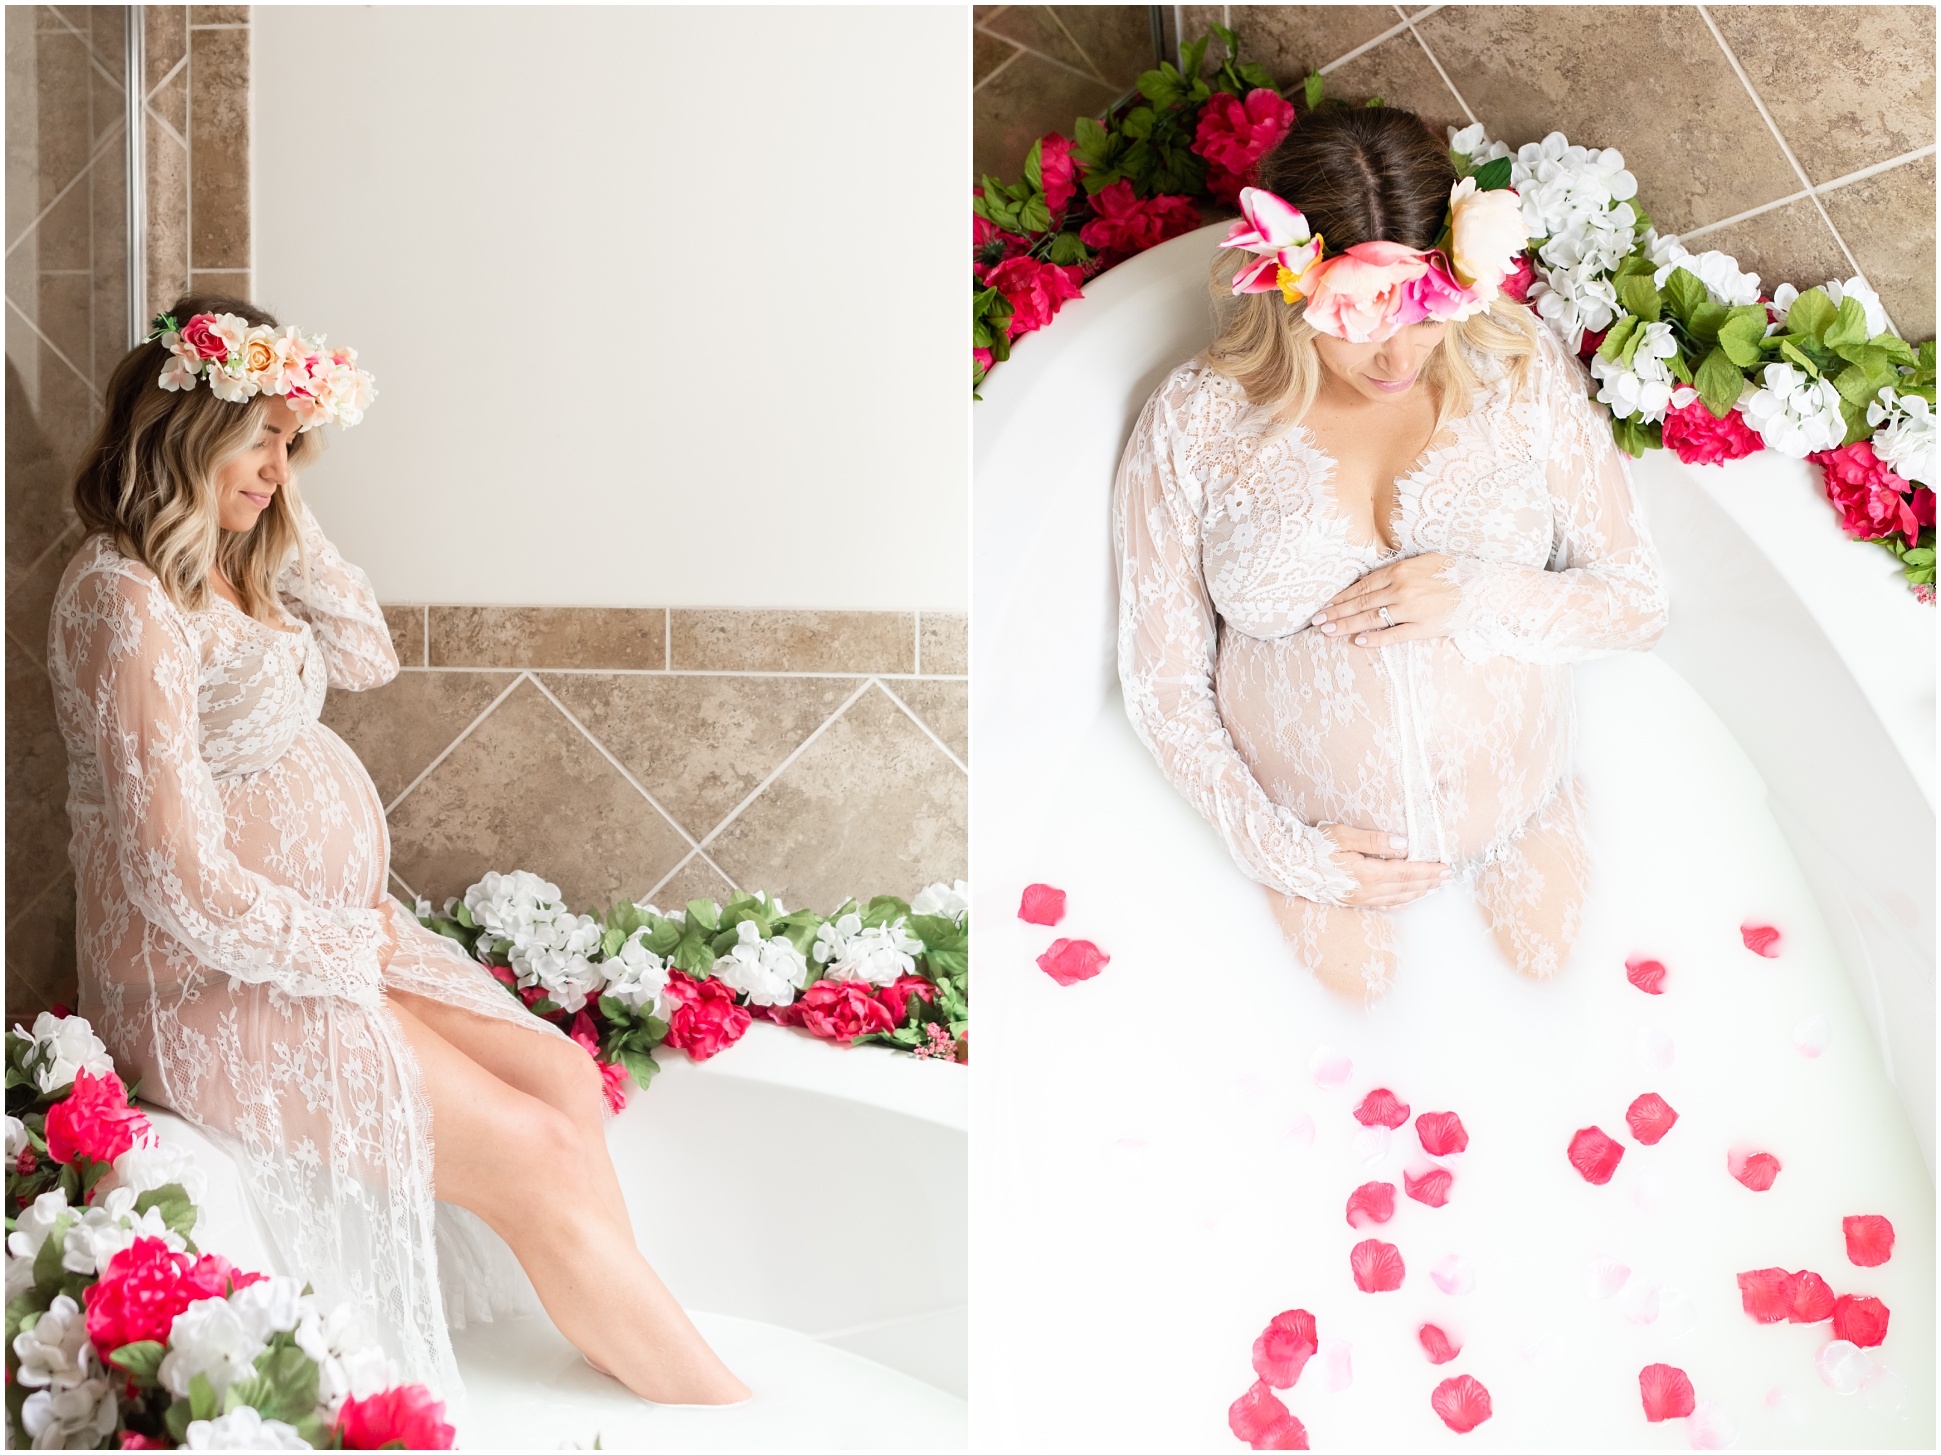 Maternity Milk Bath with Lace Dress and Pink Roses